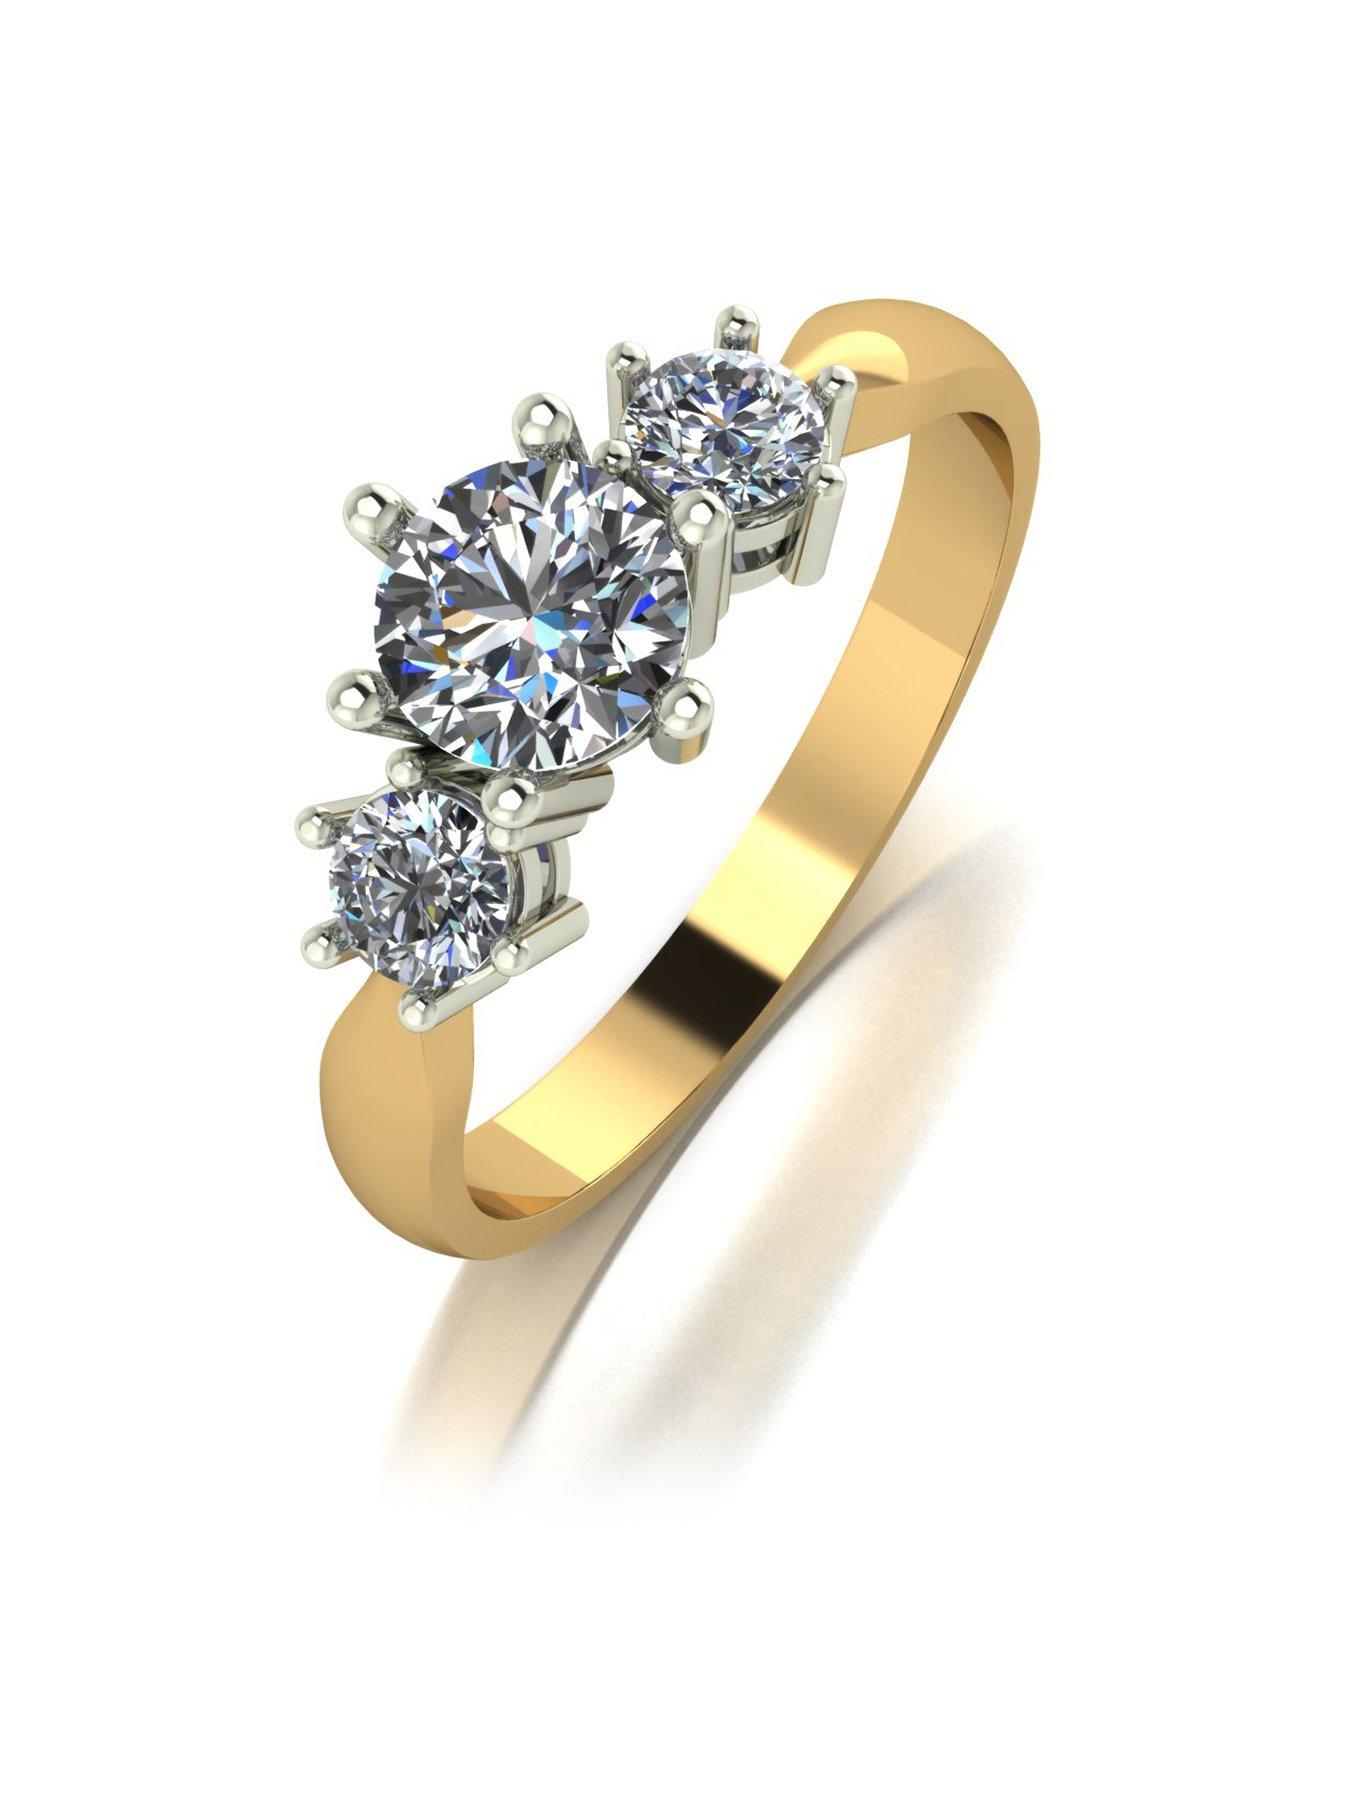 Details about   1.35Ct Diamond Cluster Half Eternity Band Wedding Ring 14k Yellow Gold Over 